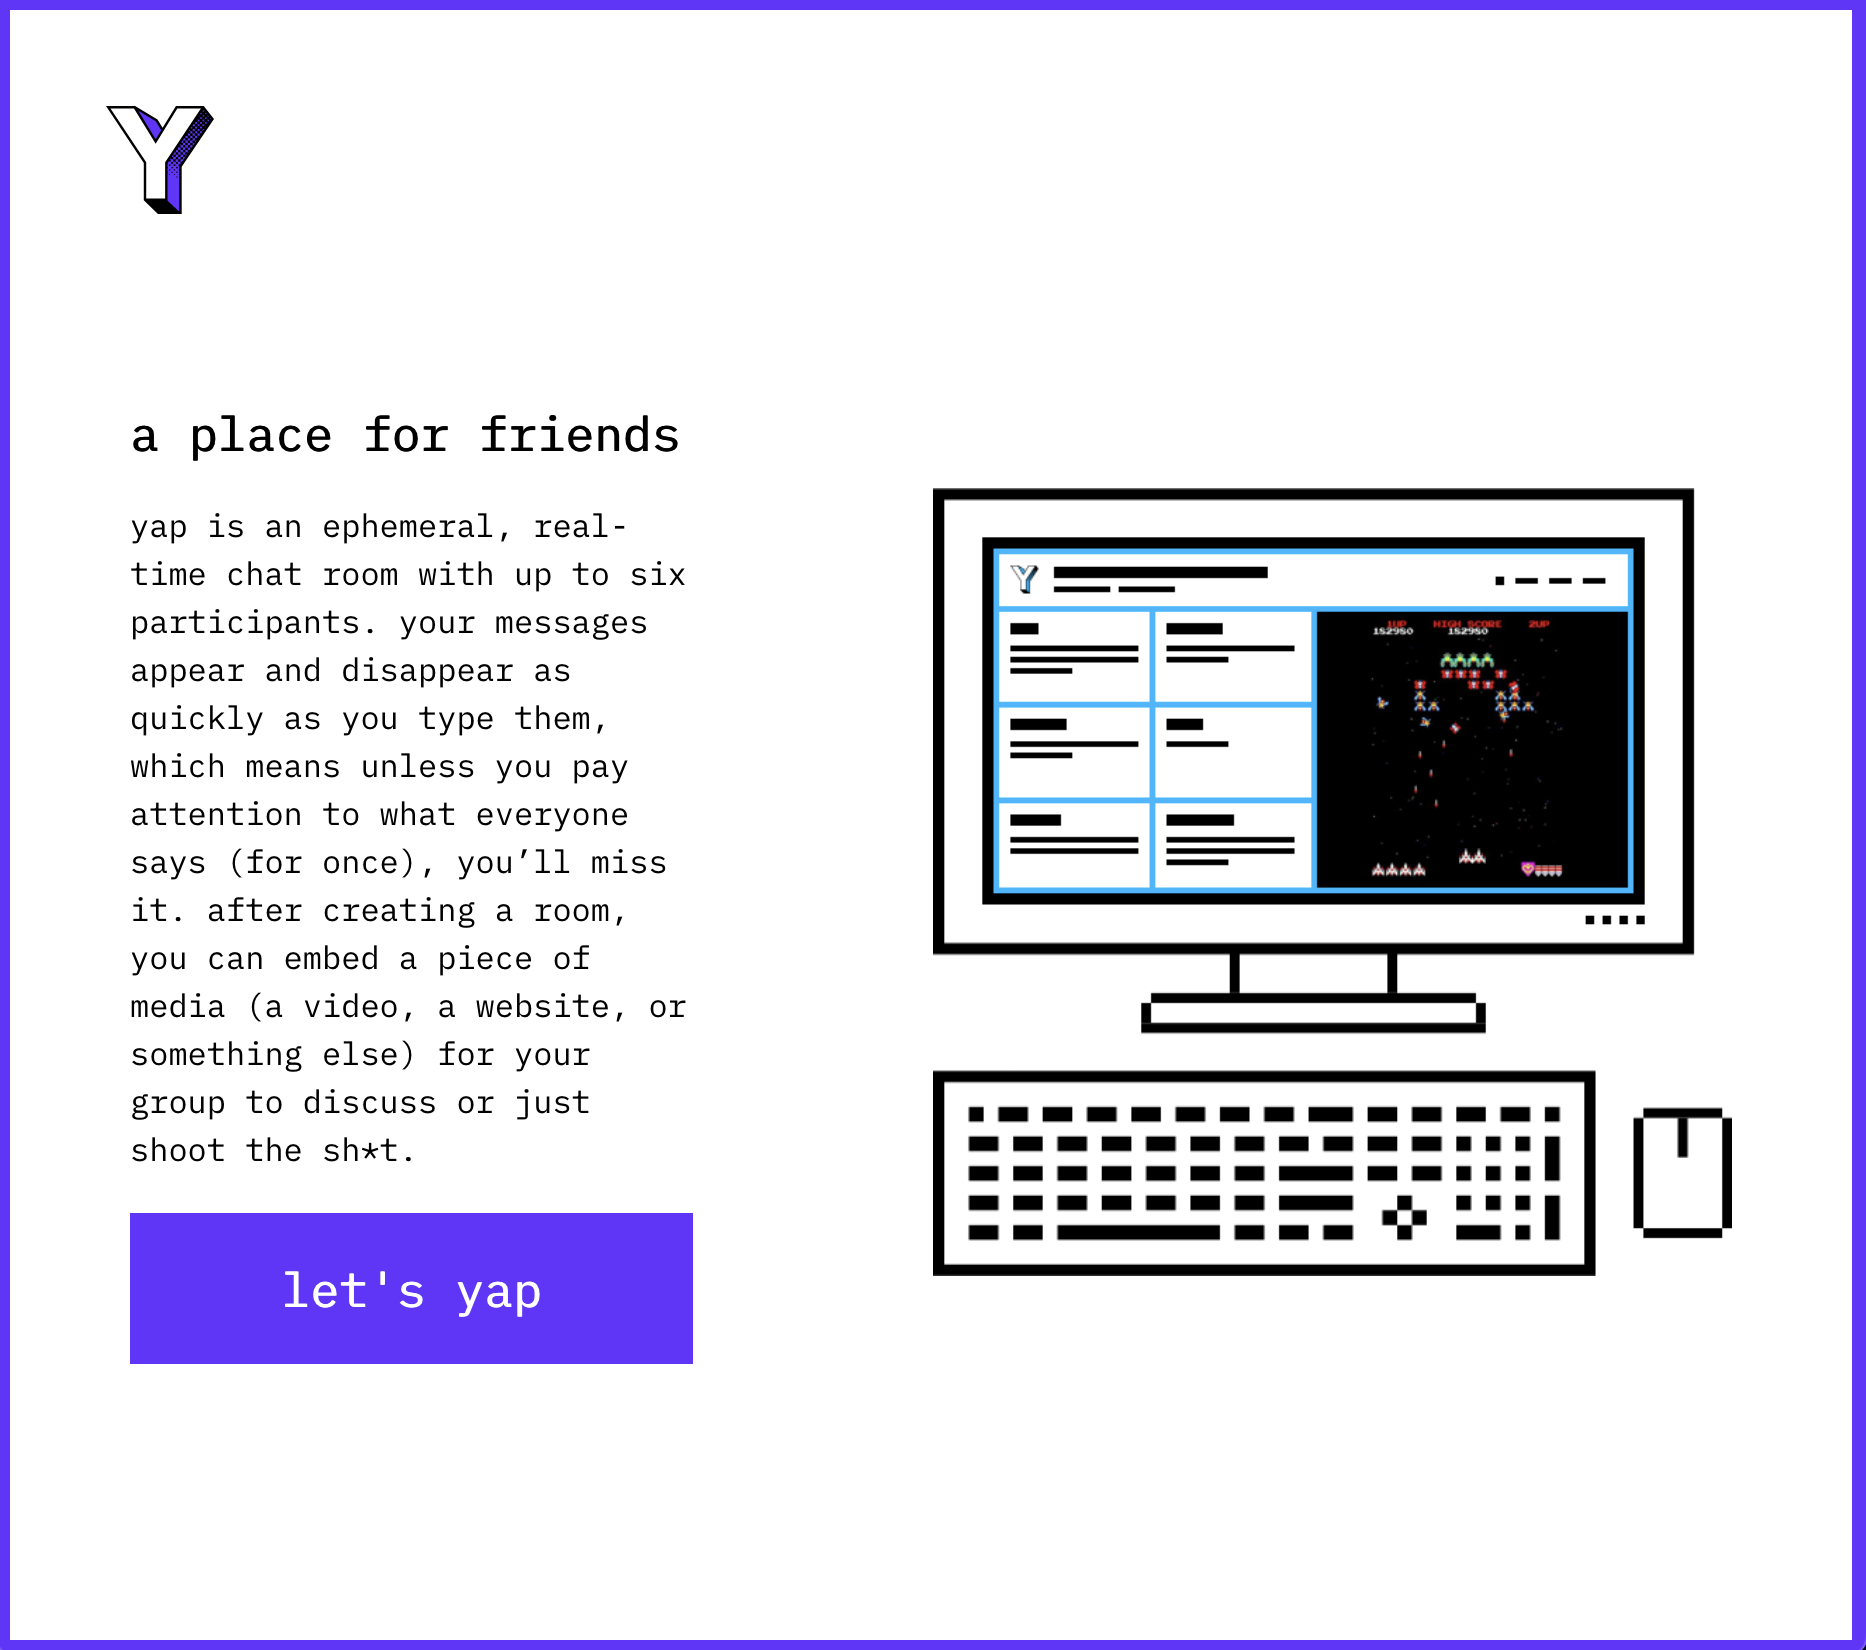 The landing page for yap.chat